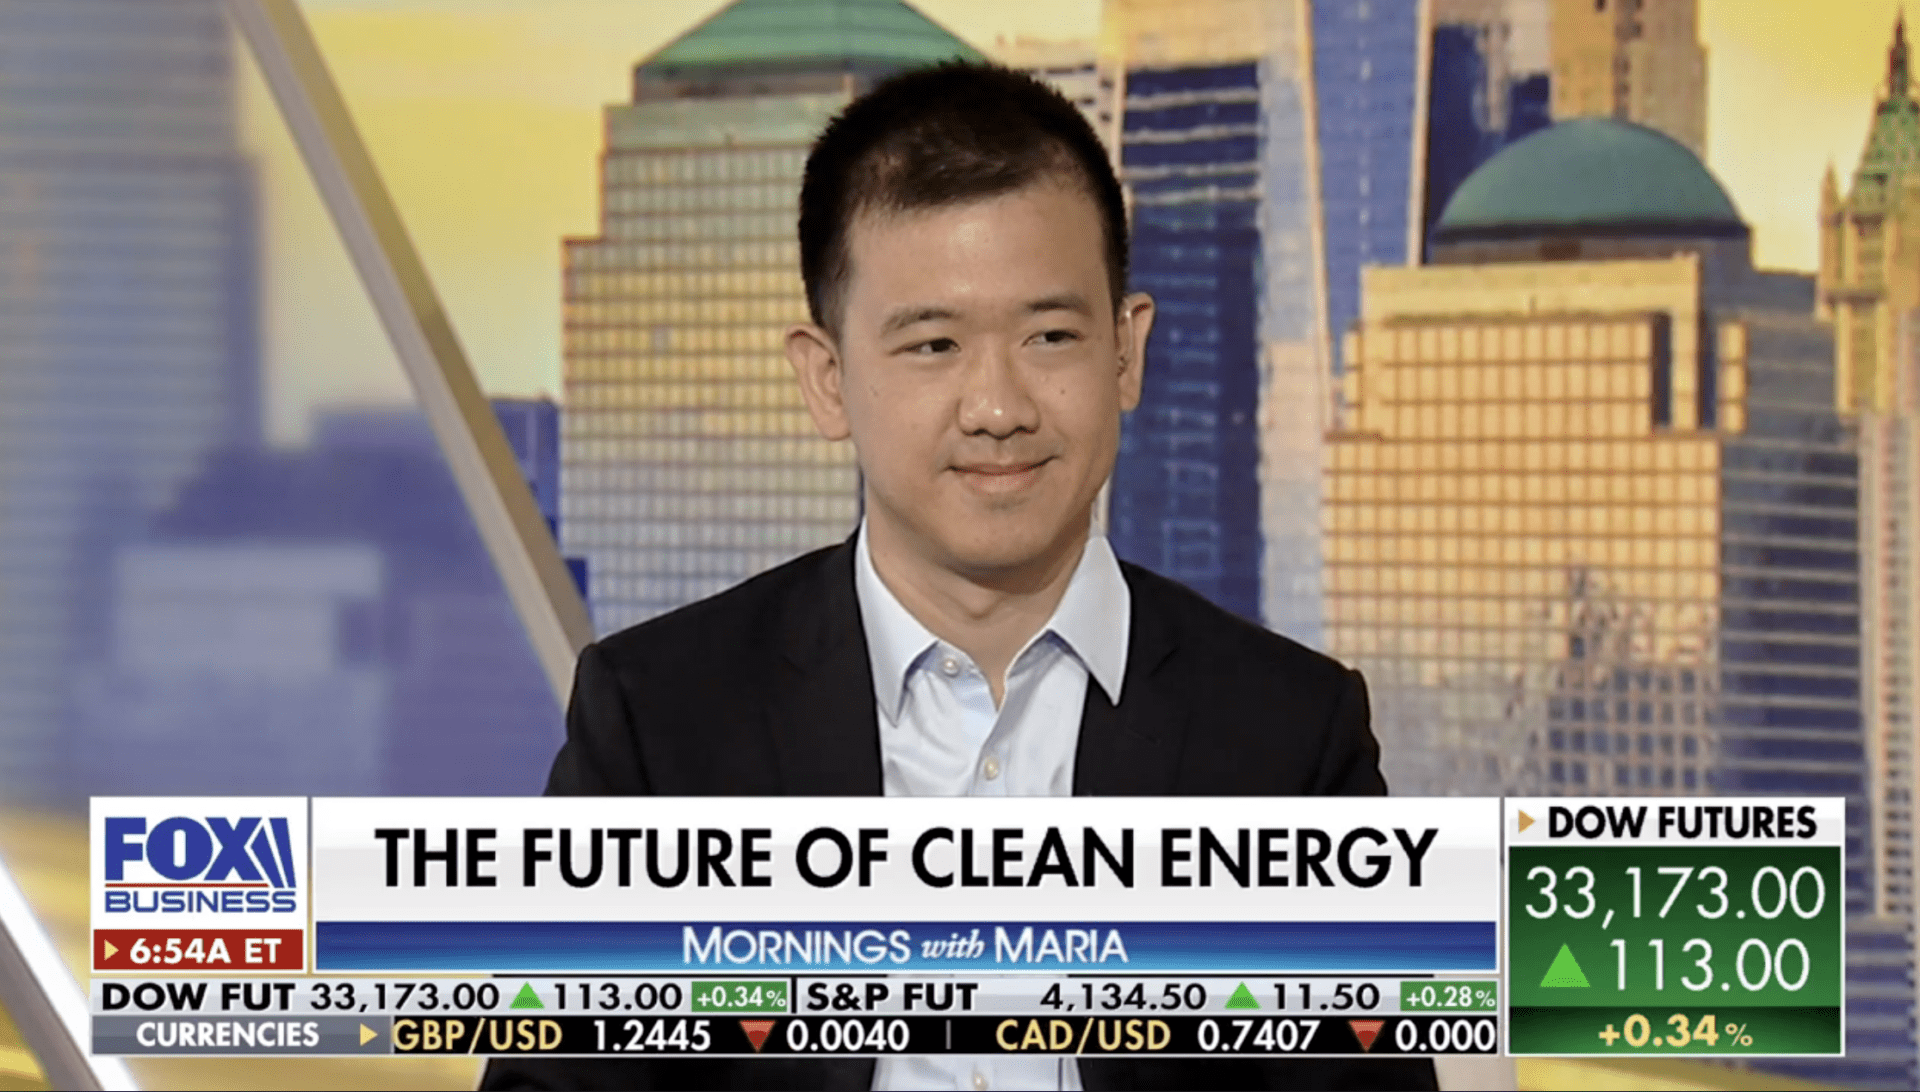 Tech innovator Tony Pan on making 'clean' natural gas: 'Have your cake and eat it too'